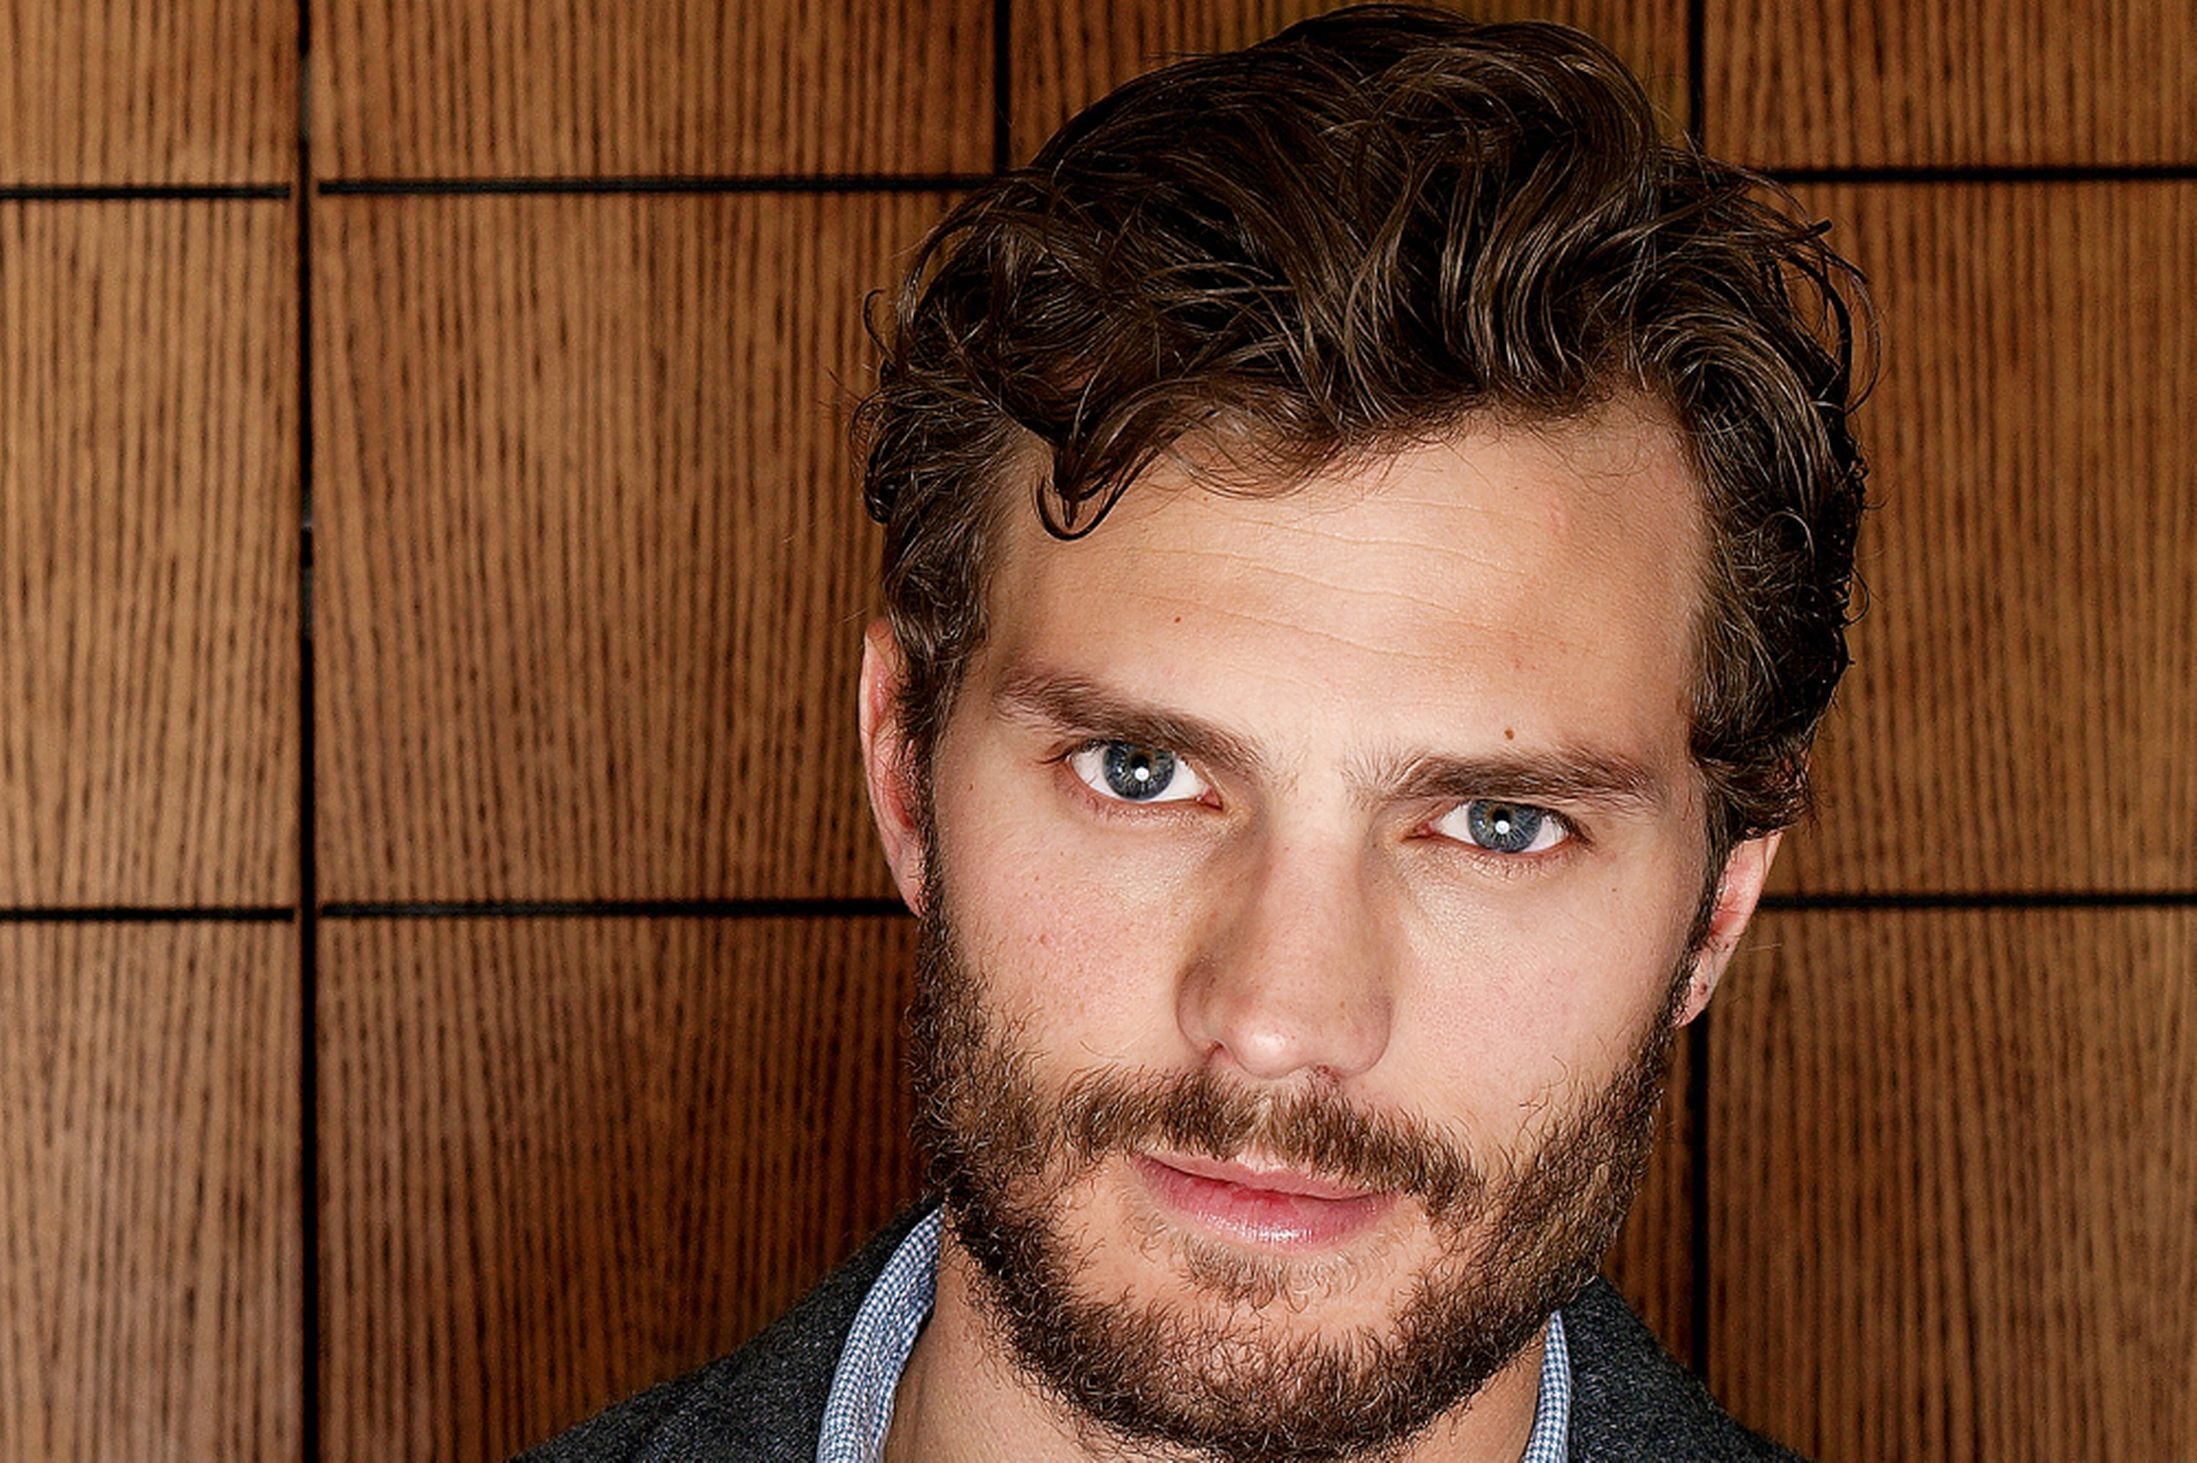 Jamie Dornan: Earned international recognition for playing Sheriff Graham Humbert in the series Once Upon a Time (2011–2013). 2200x1470 HD Wallpaper.